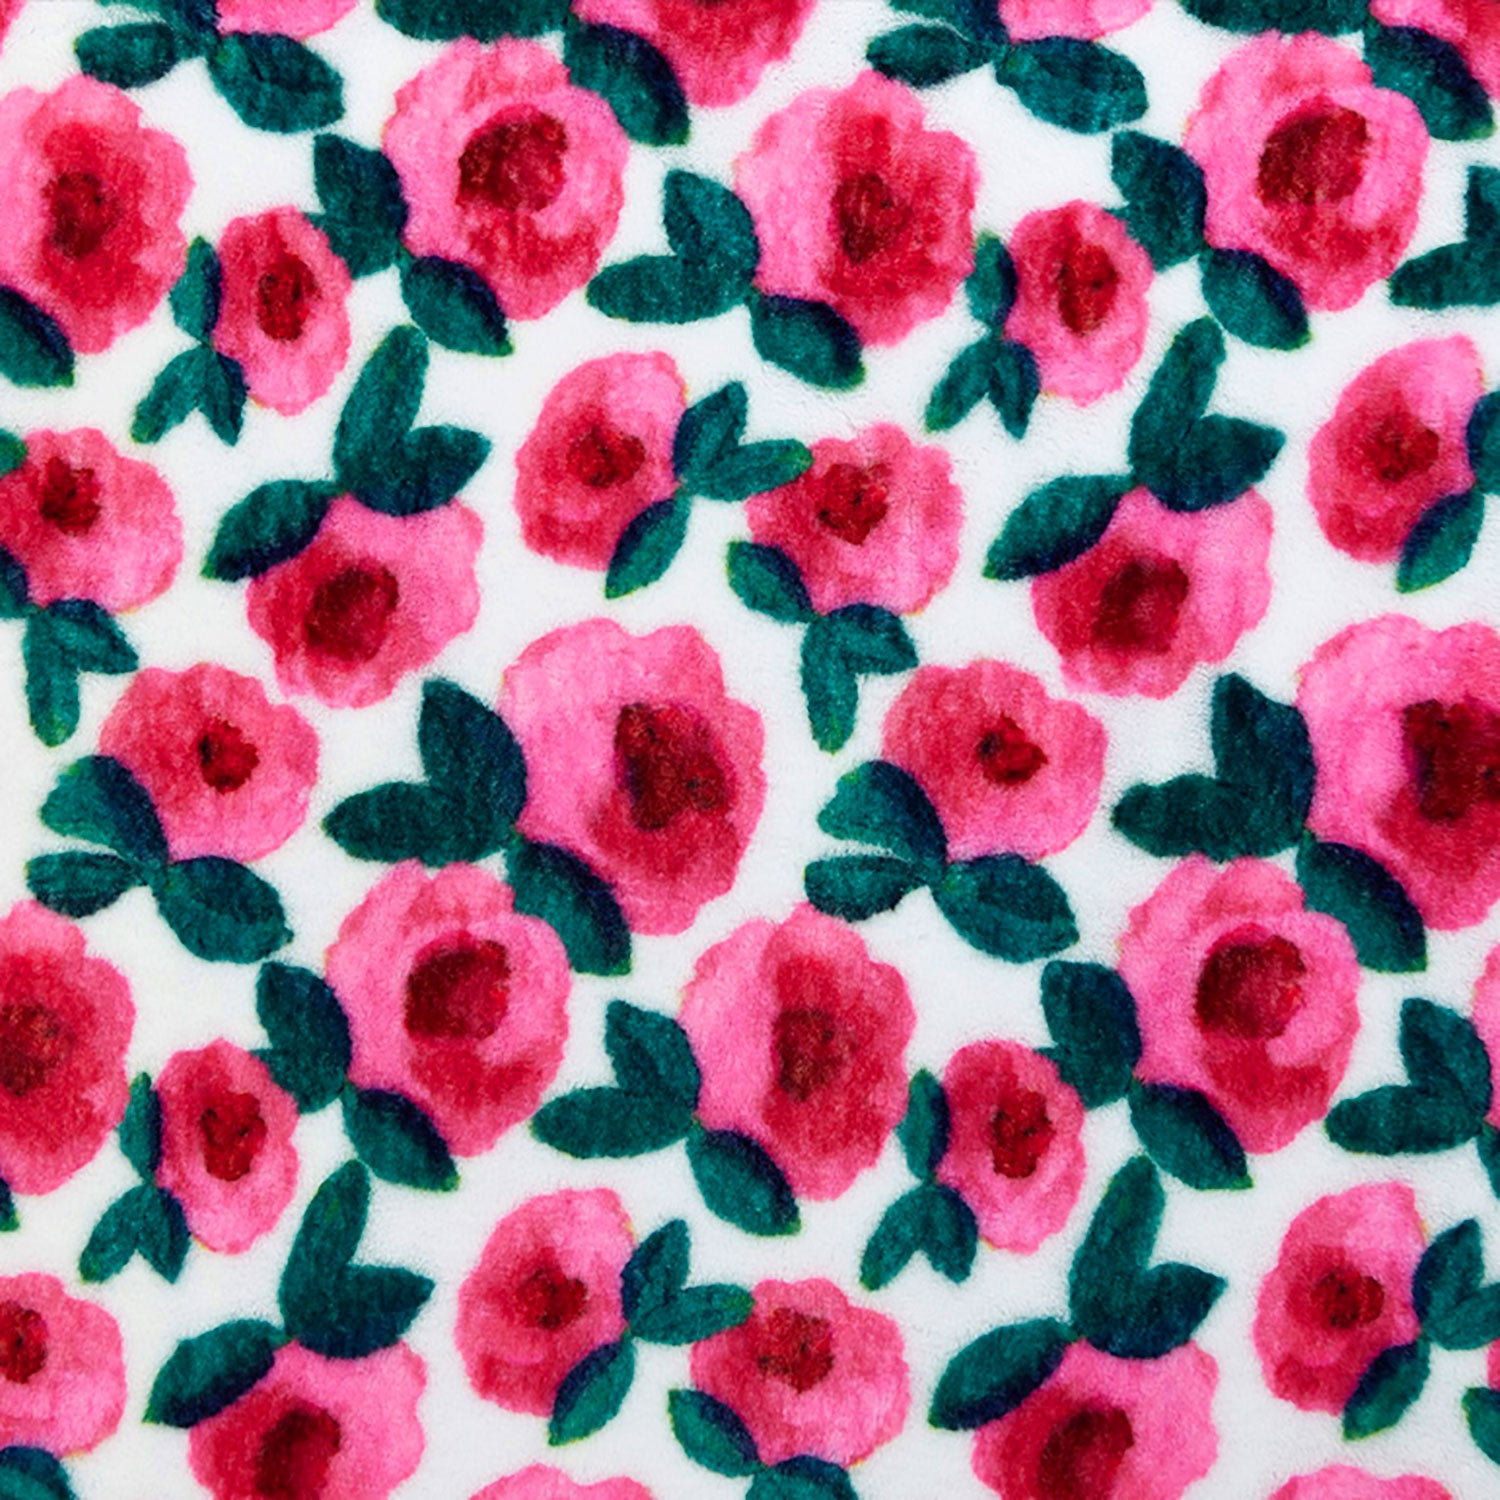 Floral Rose Minky Fabric, Decorating Fabric, Pillow or Blanket Fabric,  Soft, Low Nap Minky Fabric, Pink Floral Fabric 